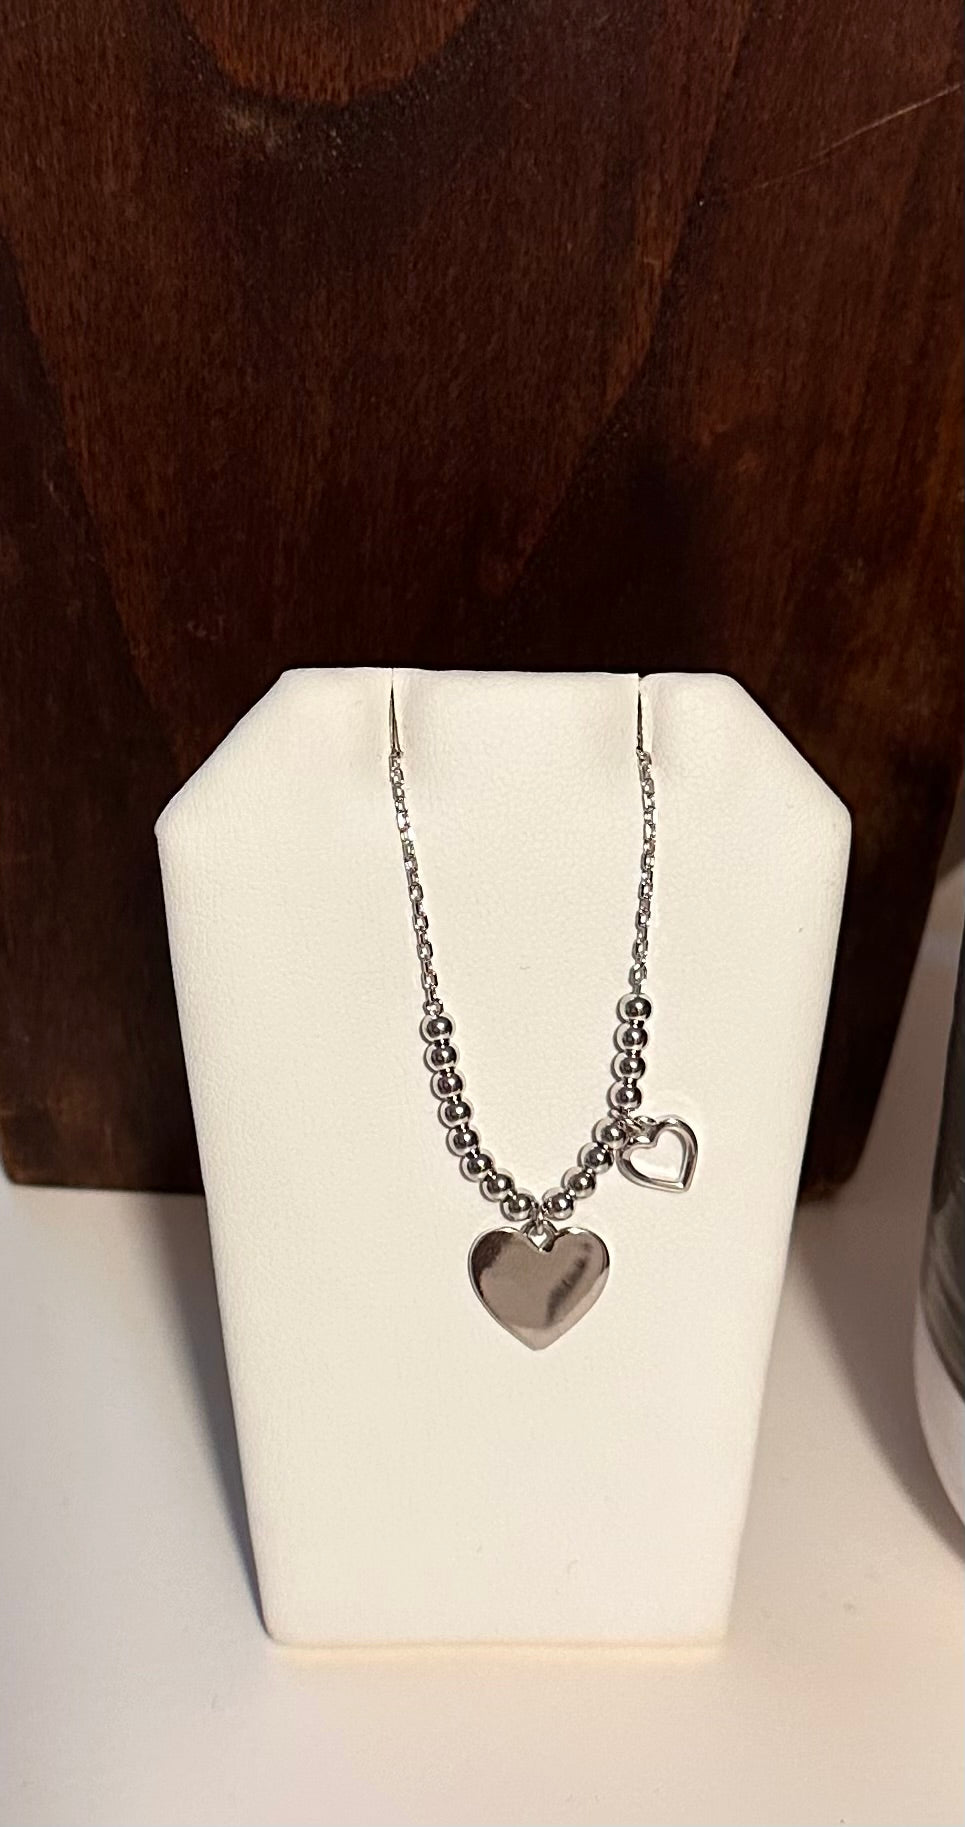 Heart and mini heart necklace